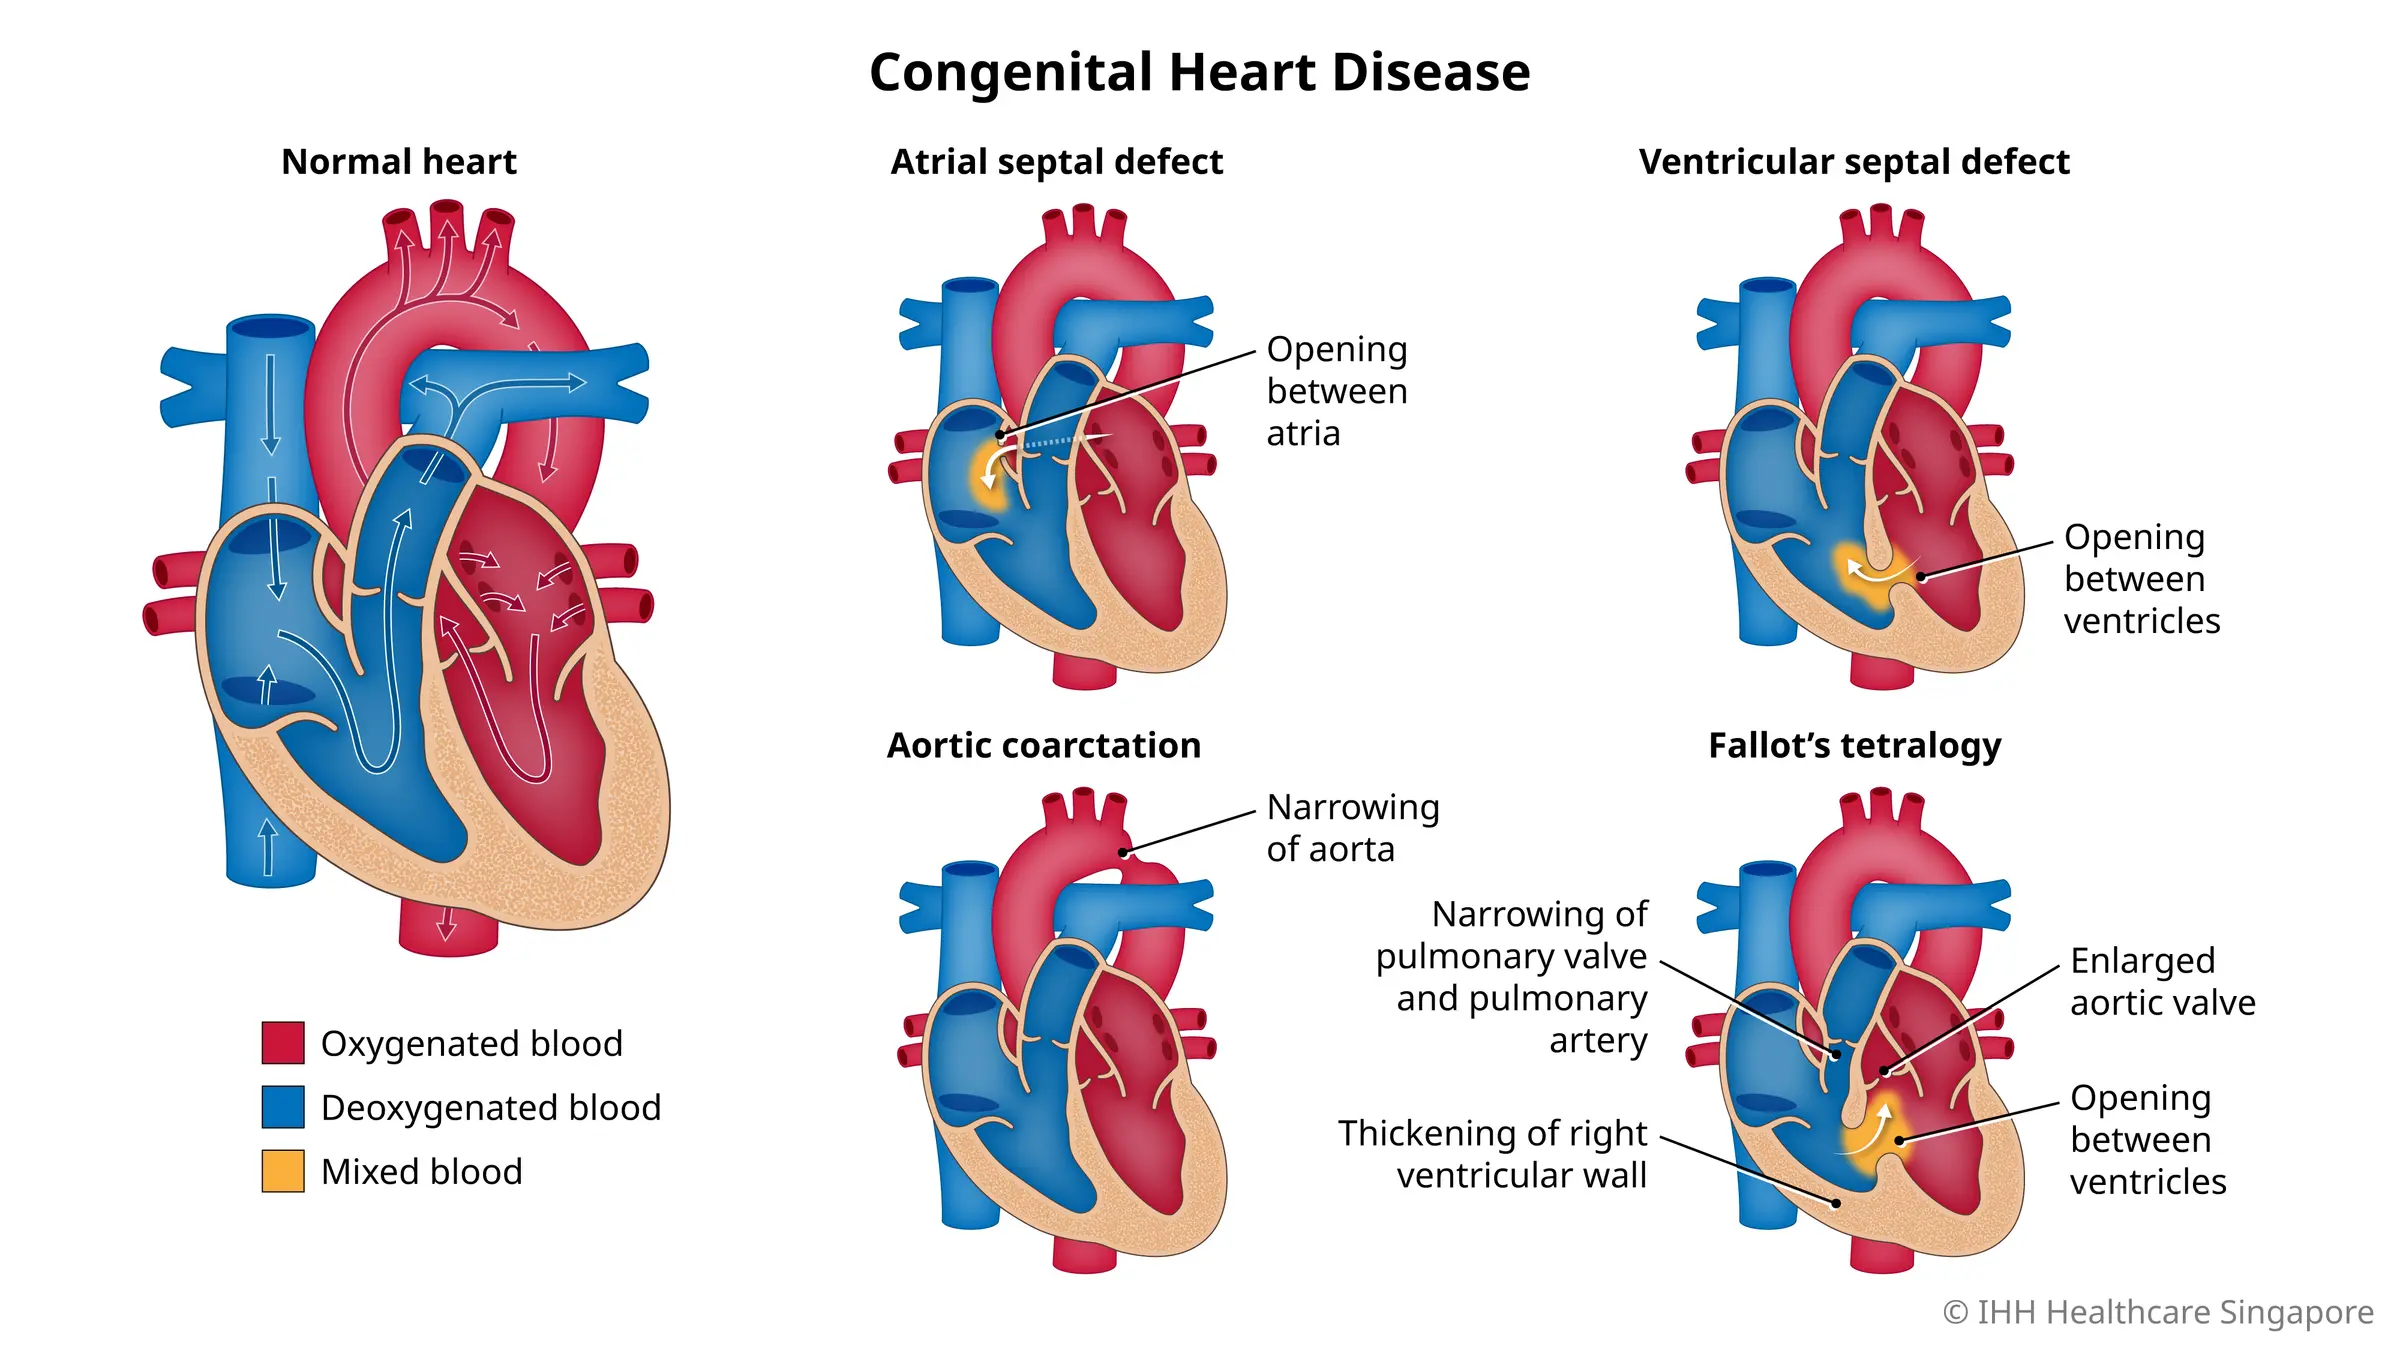 Congenital heart diseases comprise a range of heart defects that exist since birth and vary in severity.